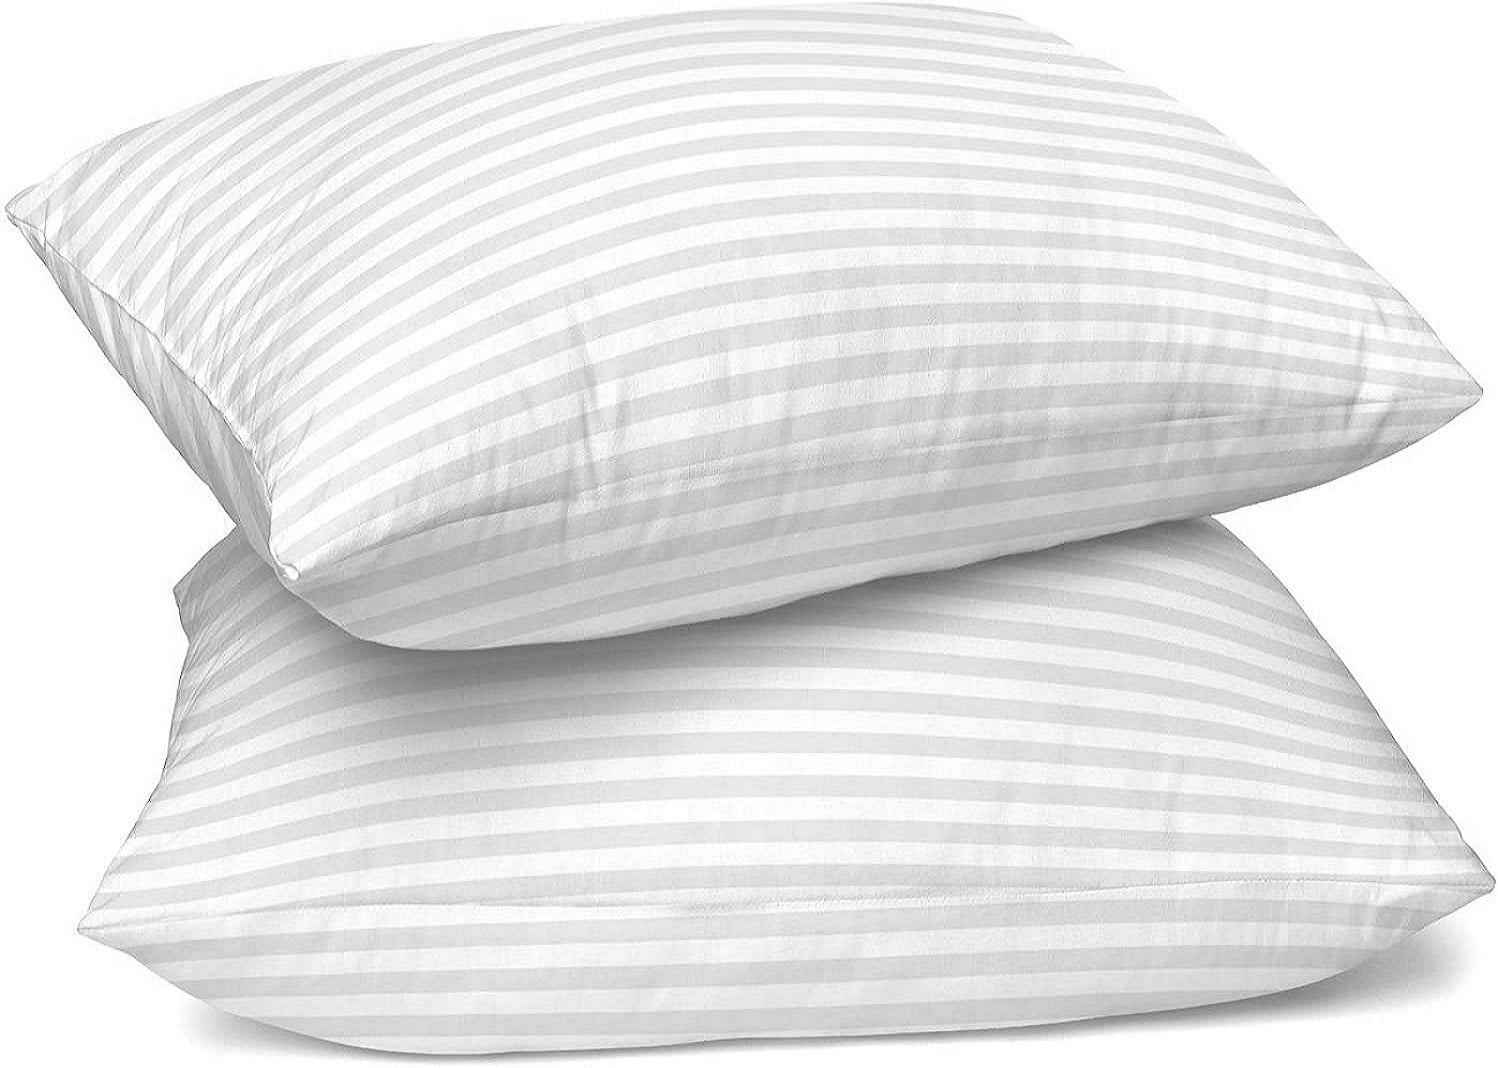 Lux Decor Collection Luxury Hotel Pillows - Sleeping Pillows for Bed,  Cotton Stripes Queen Pillows Set of 2